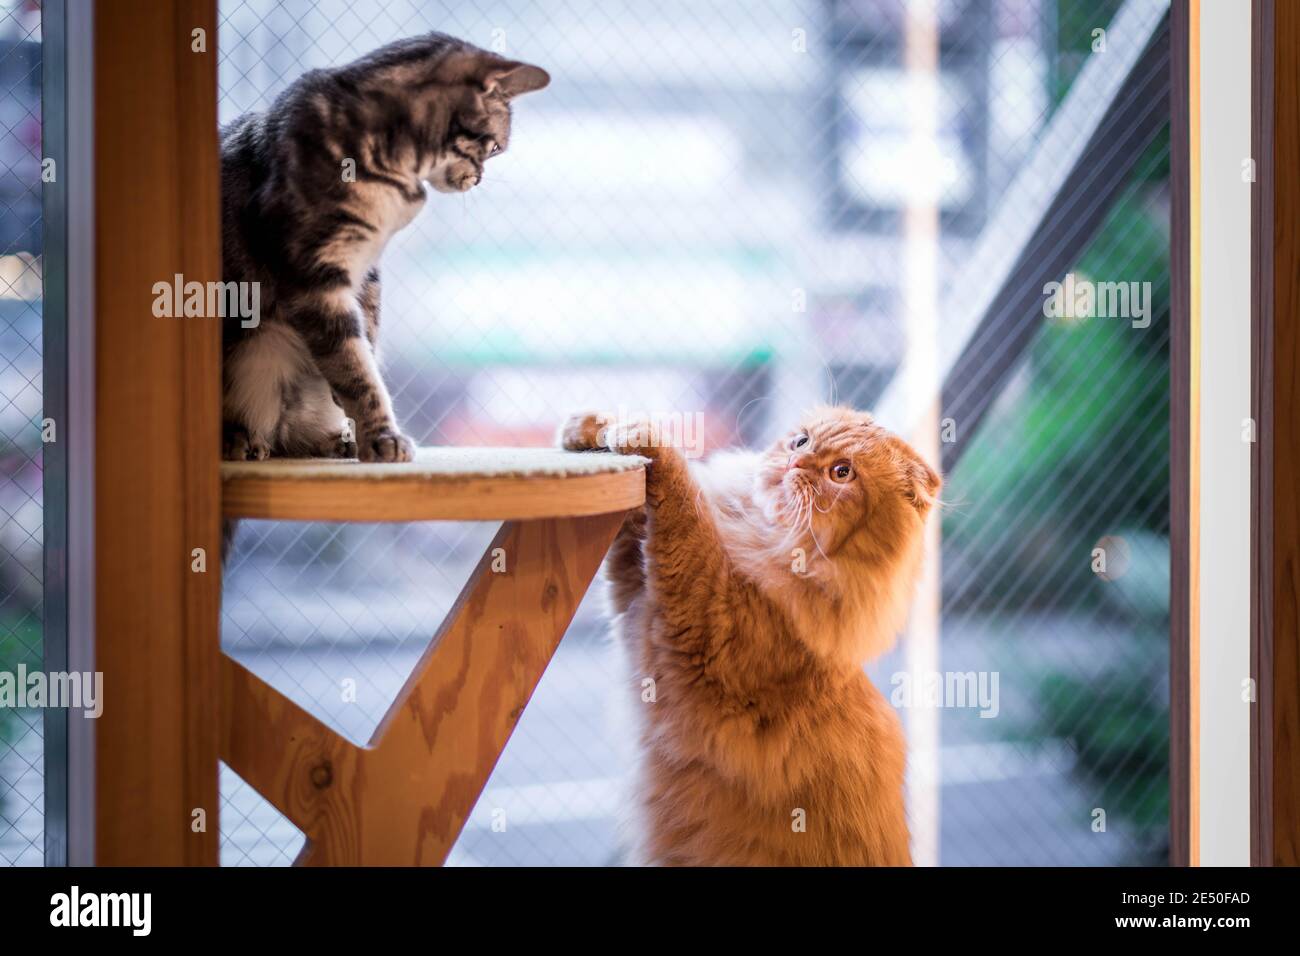 Close up of a tabby cat playing with a red persian one in front of a large window Stock Photo